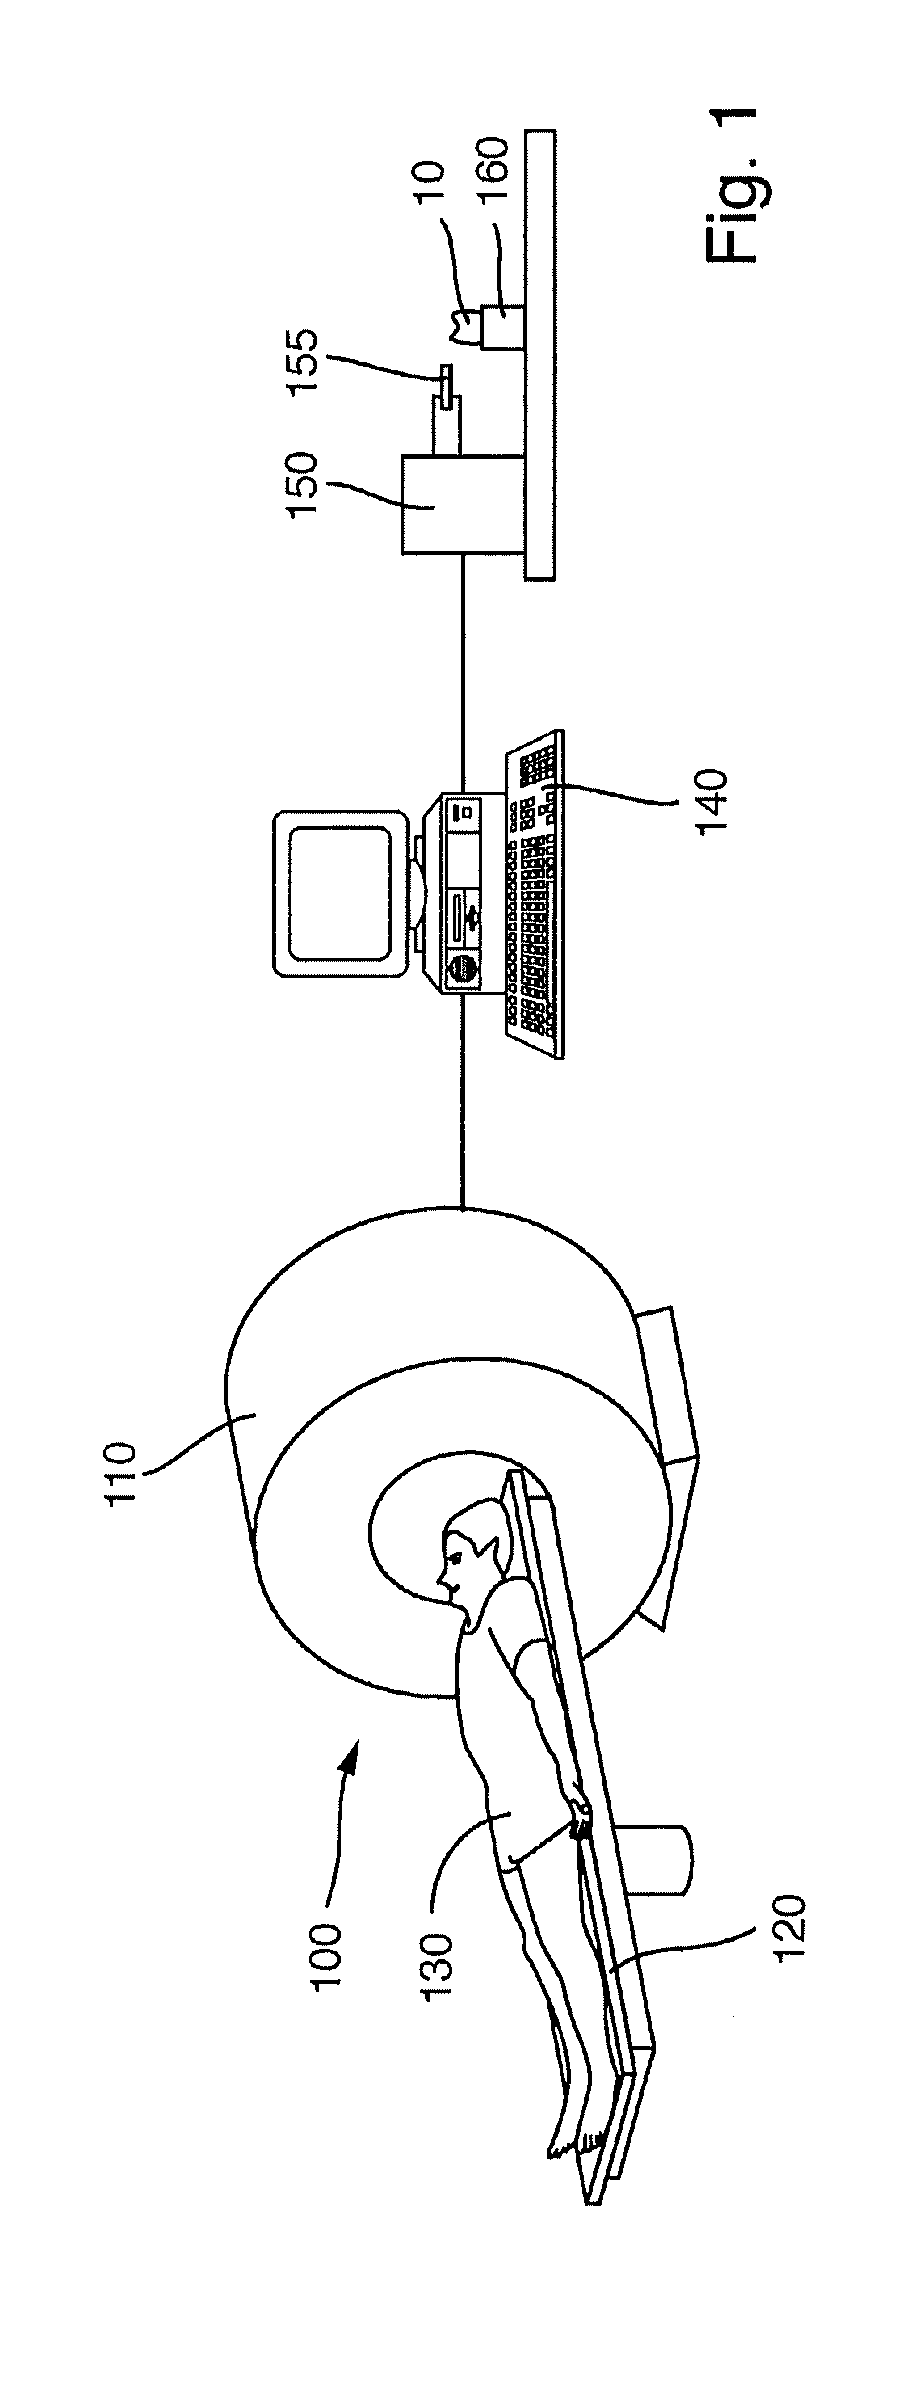 Method for producing an anatomical dental implant